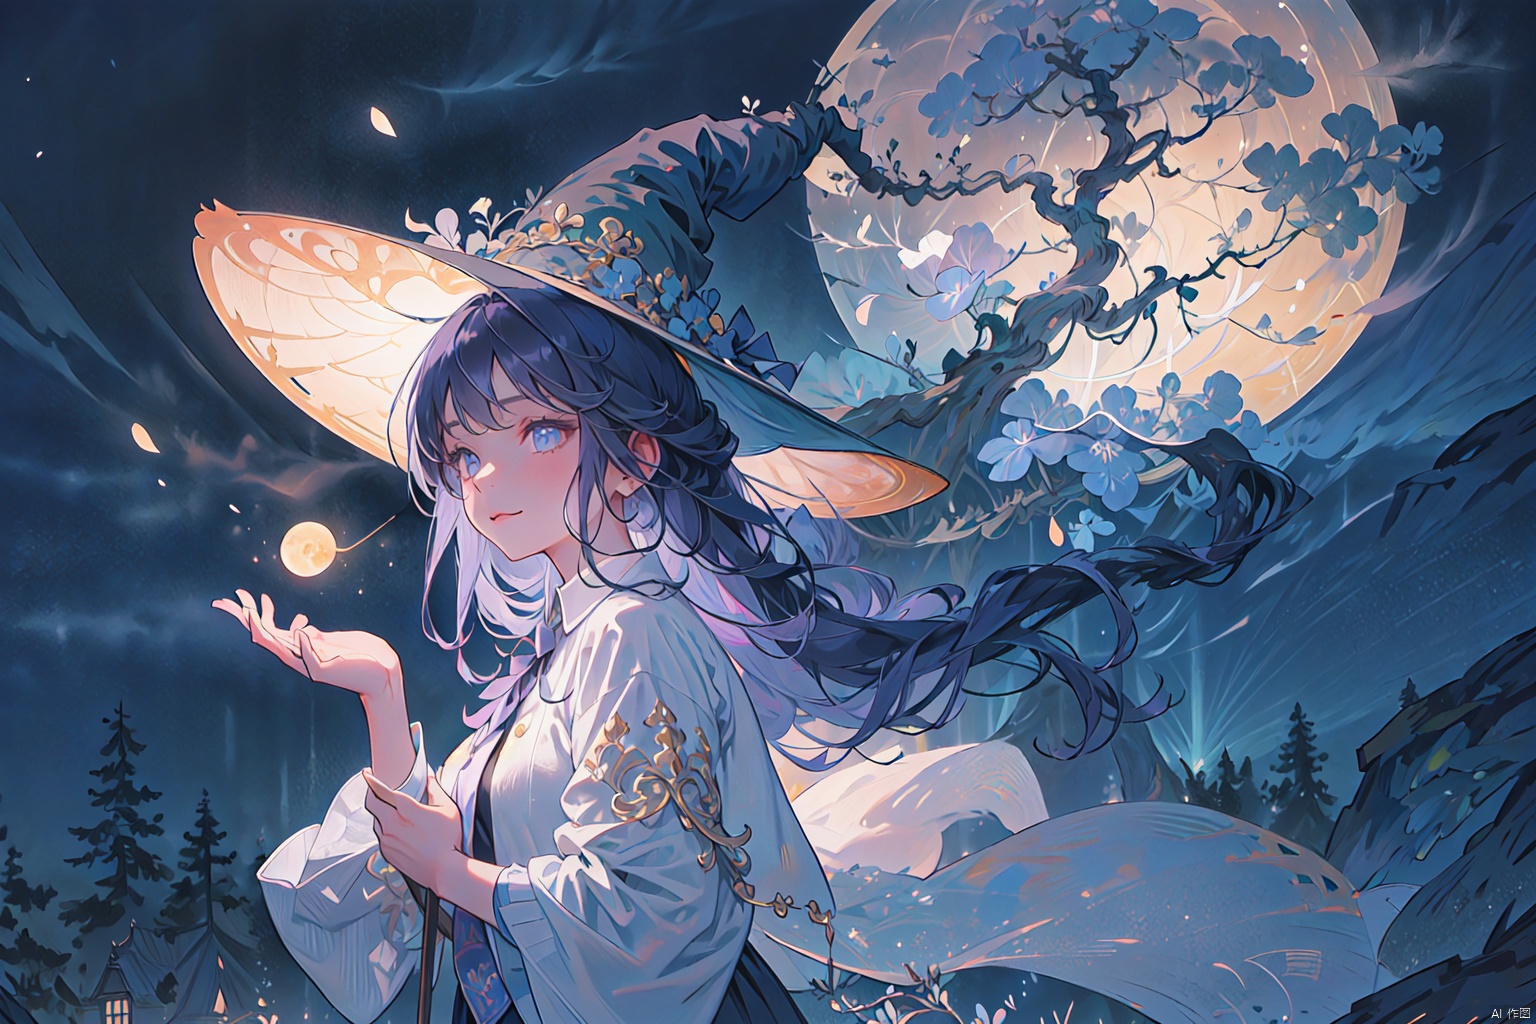 Best quality, masterpiece, illustration, super detailed, beautiful detailed eyes, (1 girl: 1.3), (witch: 1.2), eyes looking straight ahead, ordinary robe but fine details, (purple tone: 1.0), night vintage Castle background, bright moonlight, holding an ordinary staff but with bright spots, simplified magic circle pattern, weak rune light, energy gathered in the hand, a small amount of floating elemental particles, natural casting movements, expressions of courage and determination, implicit protective atmosphere, summoning Small guardian creature, symbol of shared power, connection with natural elements, theme of balance and harmony, hint of the flow of time, light of wisdom, ancient trees and moonlight, smile of hope, tacit team cooperation, magic linkage symbol, simple depiction of enchantment, sense of security Convey, stardust adorns the picture.)